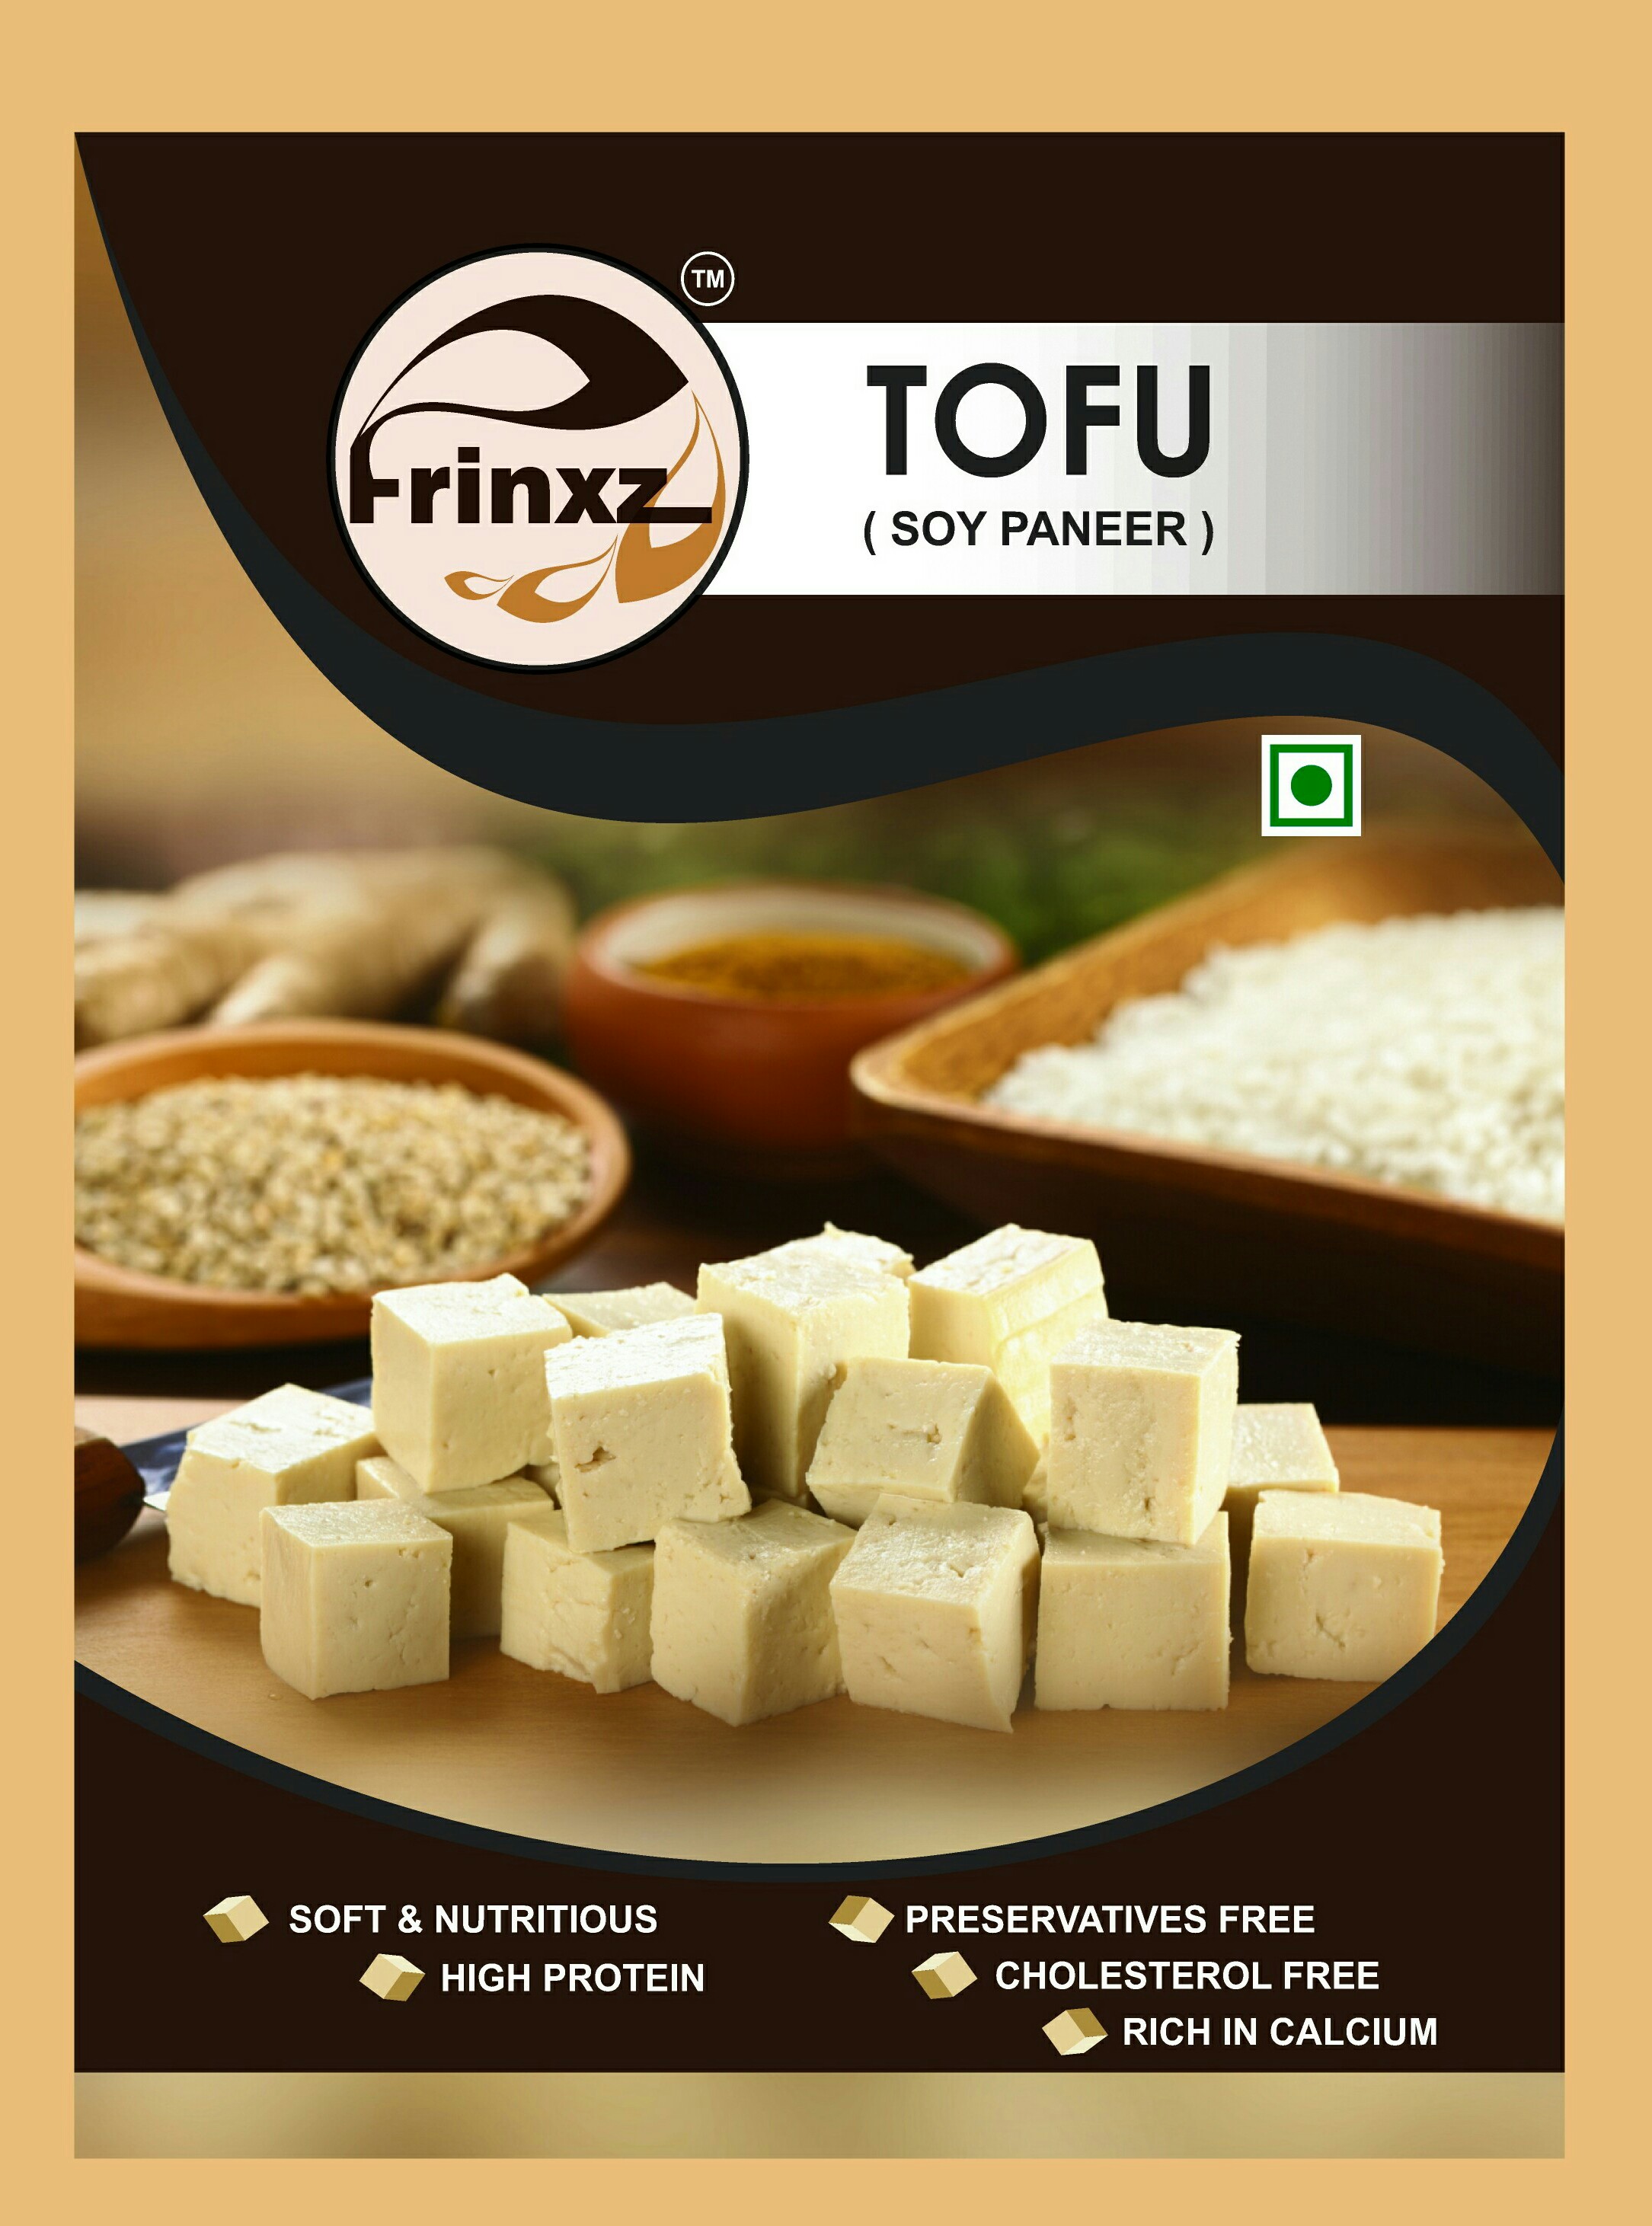 Wanted-Distributor required for Tofu in Maharashtra